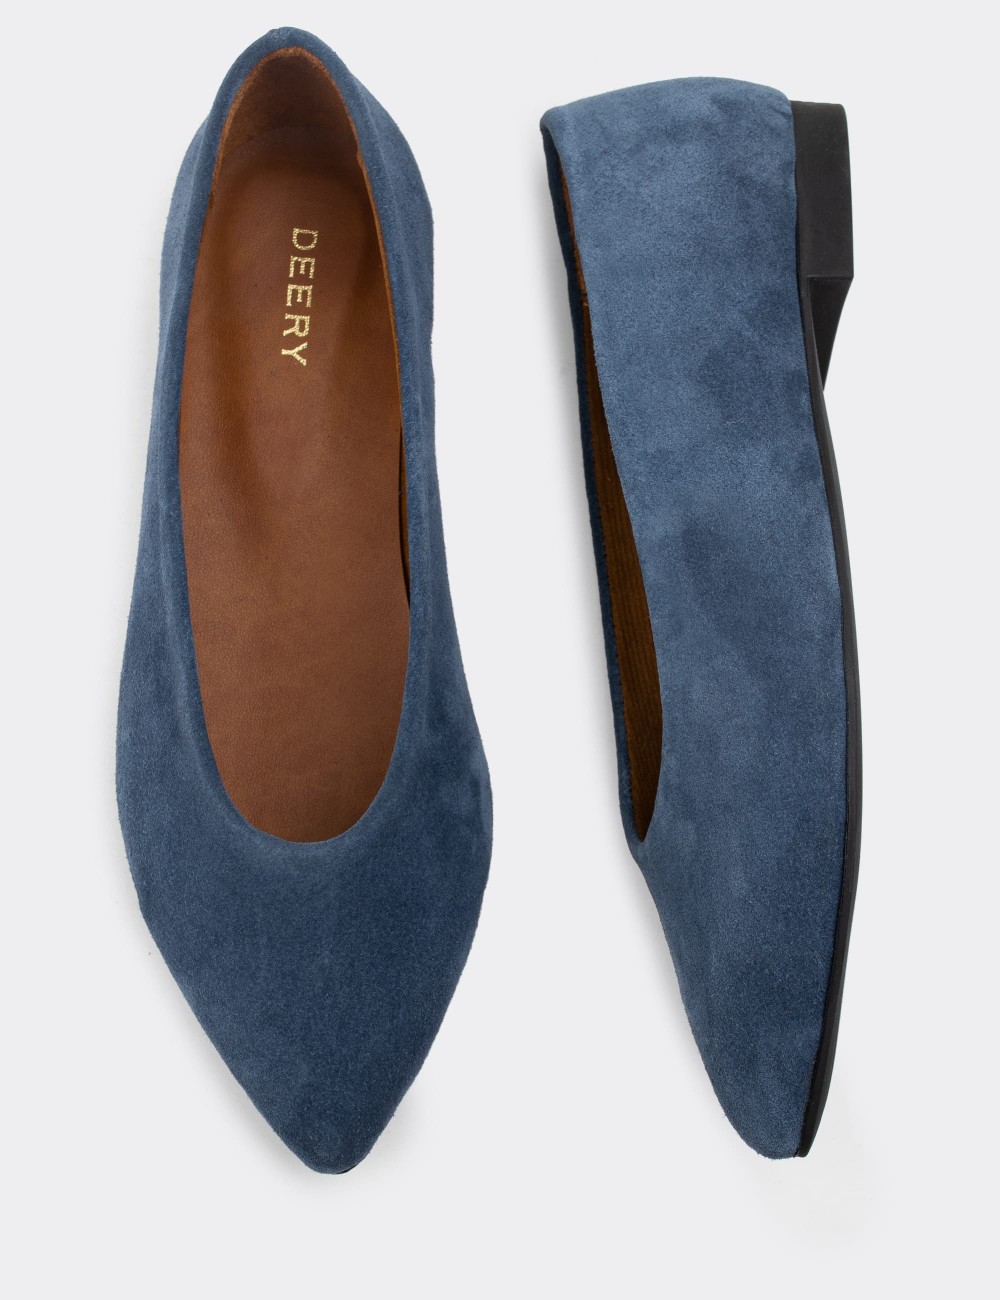 Blue Suede Leather Loafers - 01896ZMVIC01